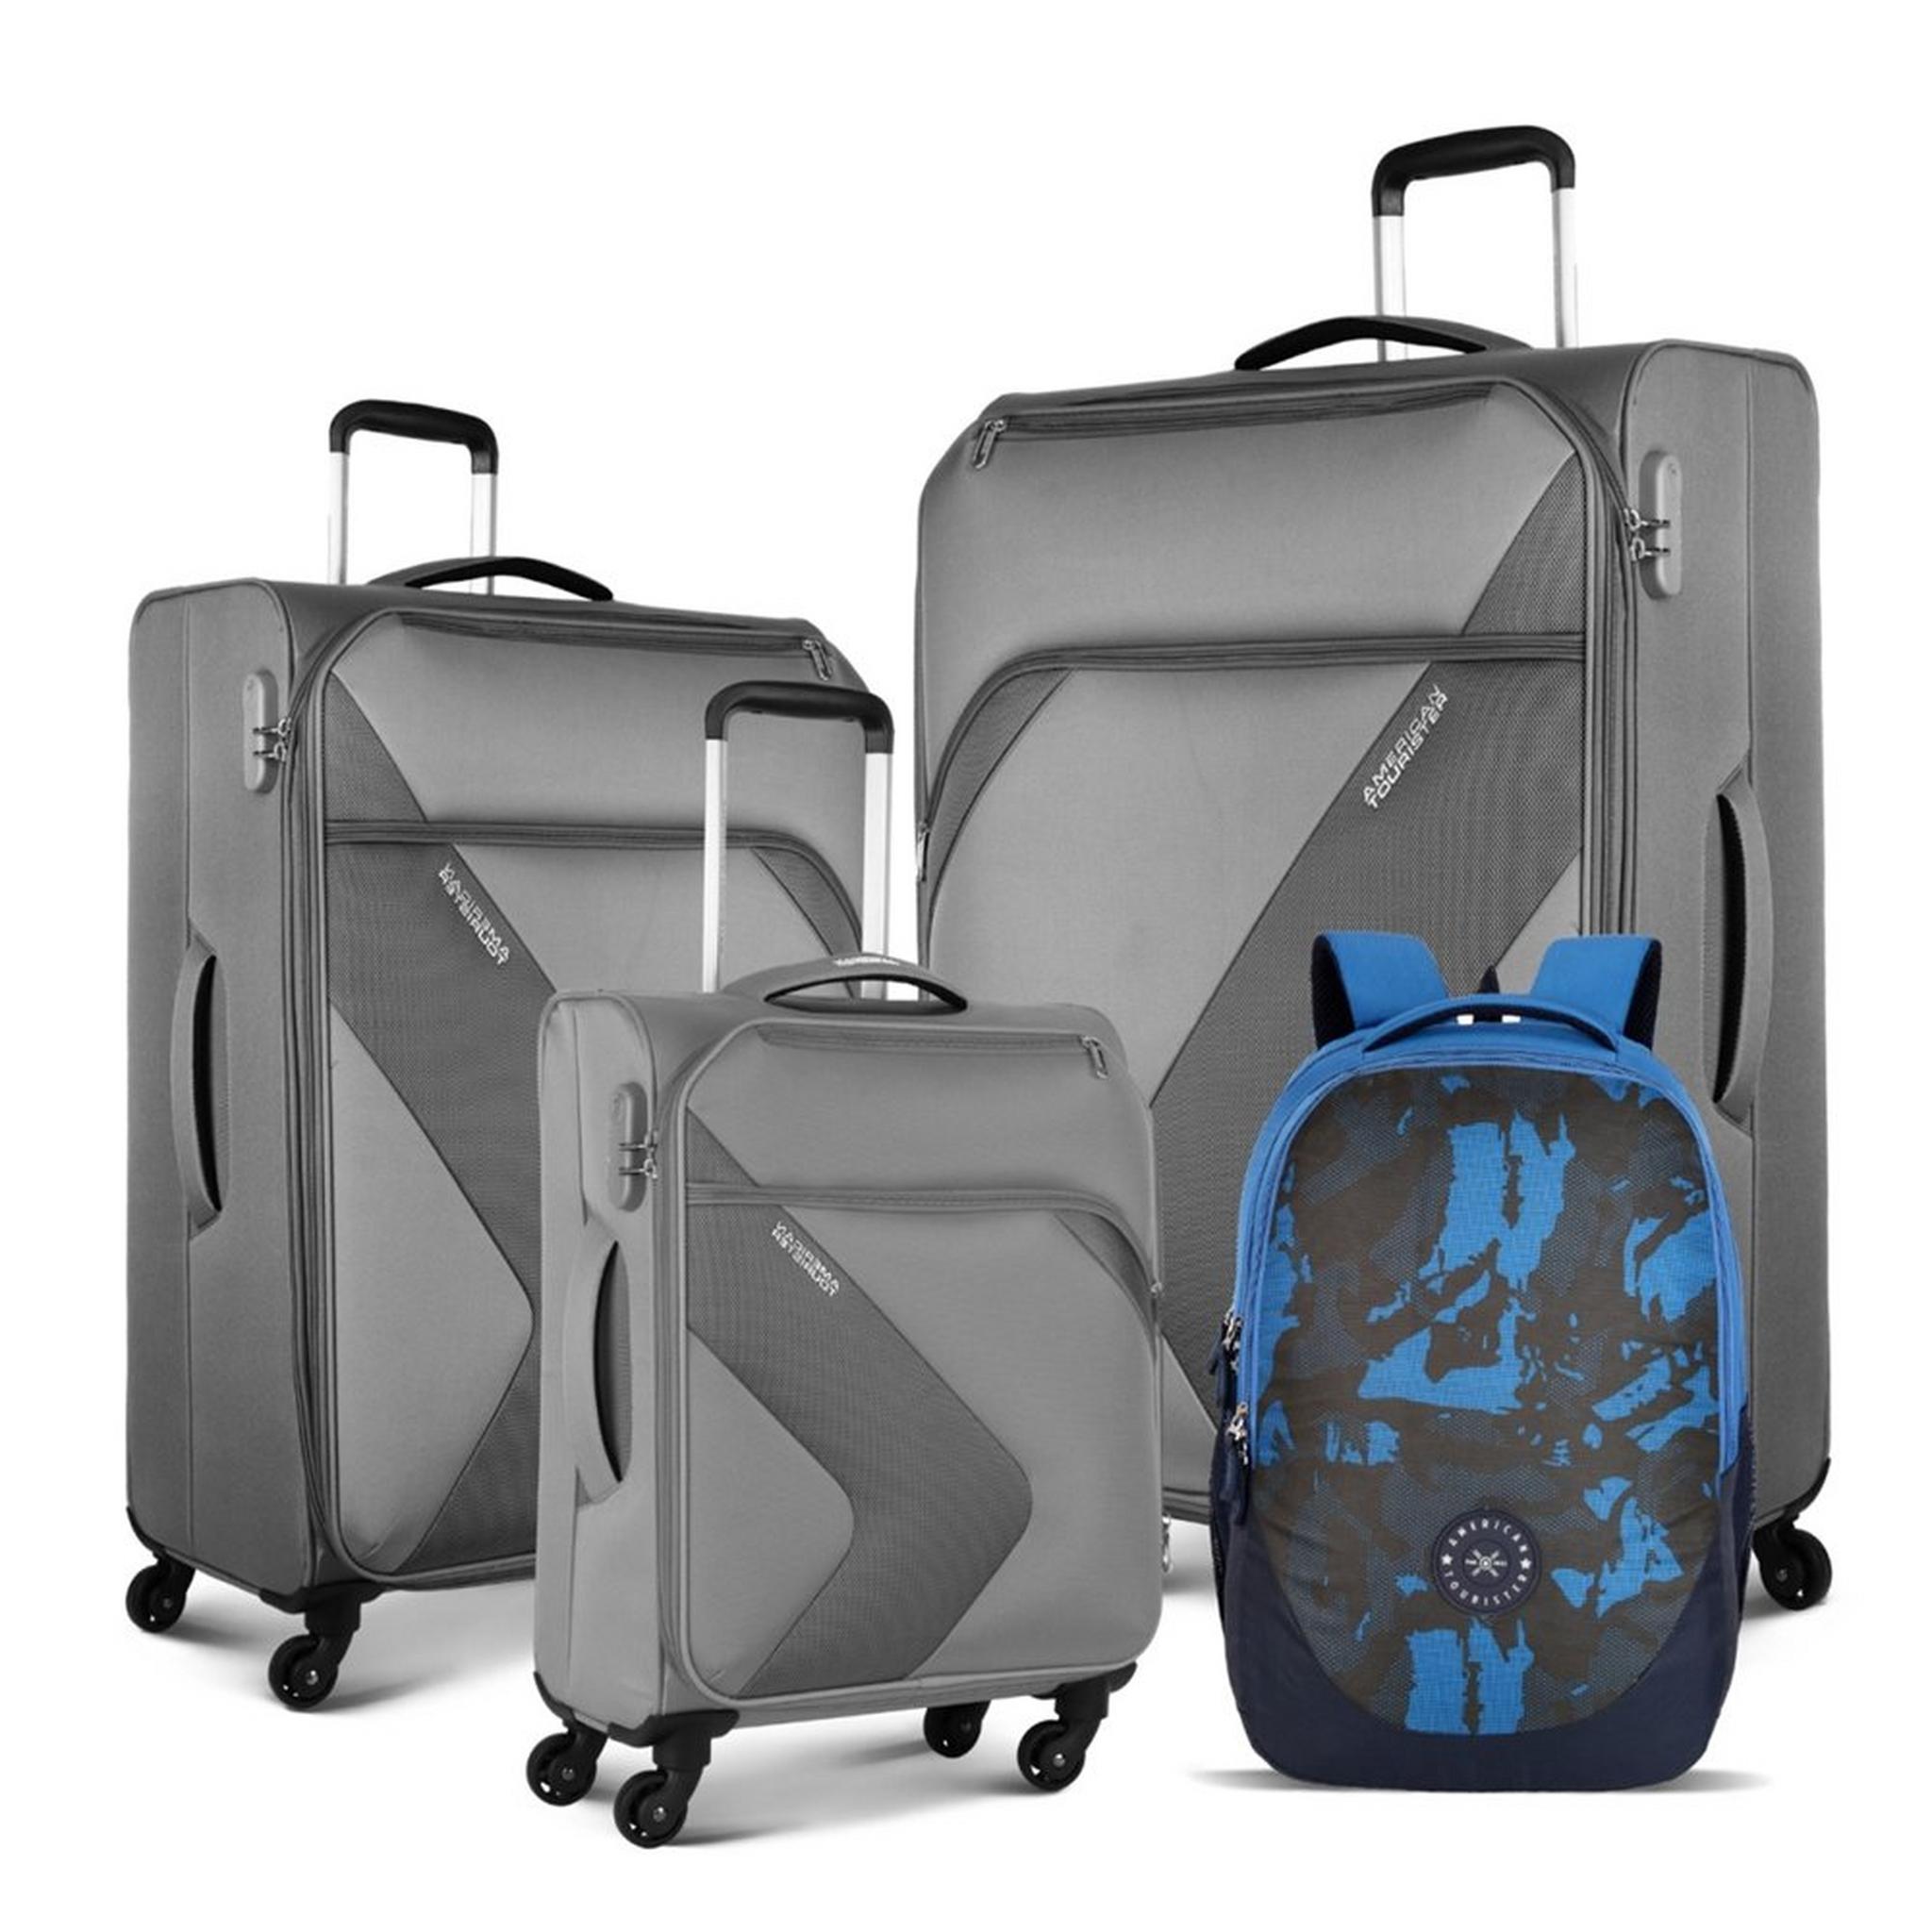 American Tourister Stanfordd Luggage Set + Backpack - Grey